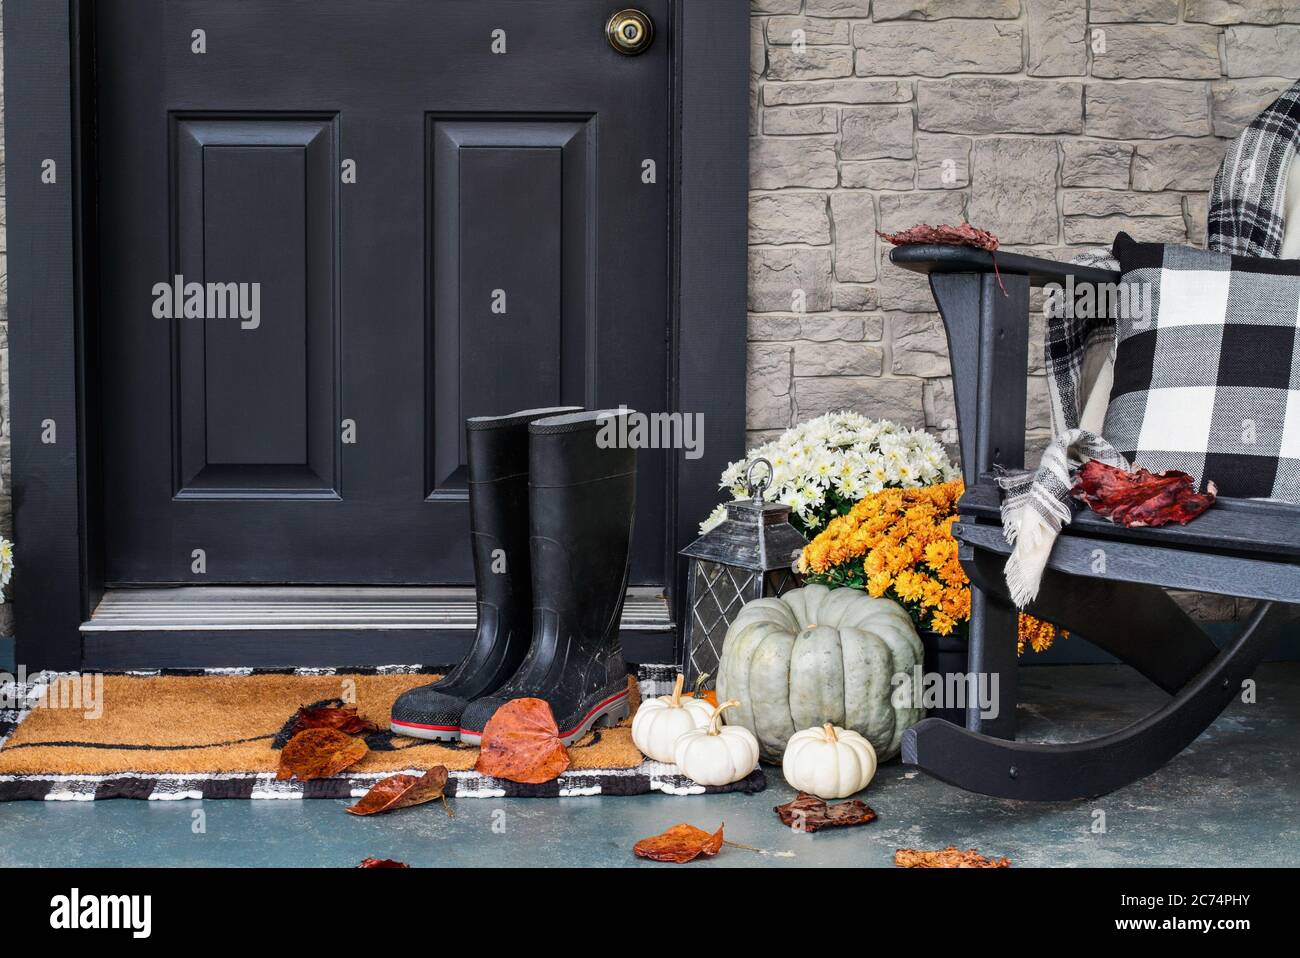 Traditional style front porch decorated for autumn with rain boots, heirloom gourds,  white pumpkins, mums and rocking chair with buffalo plaid pillow Stock Photo